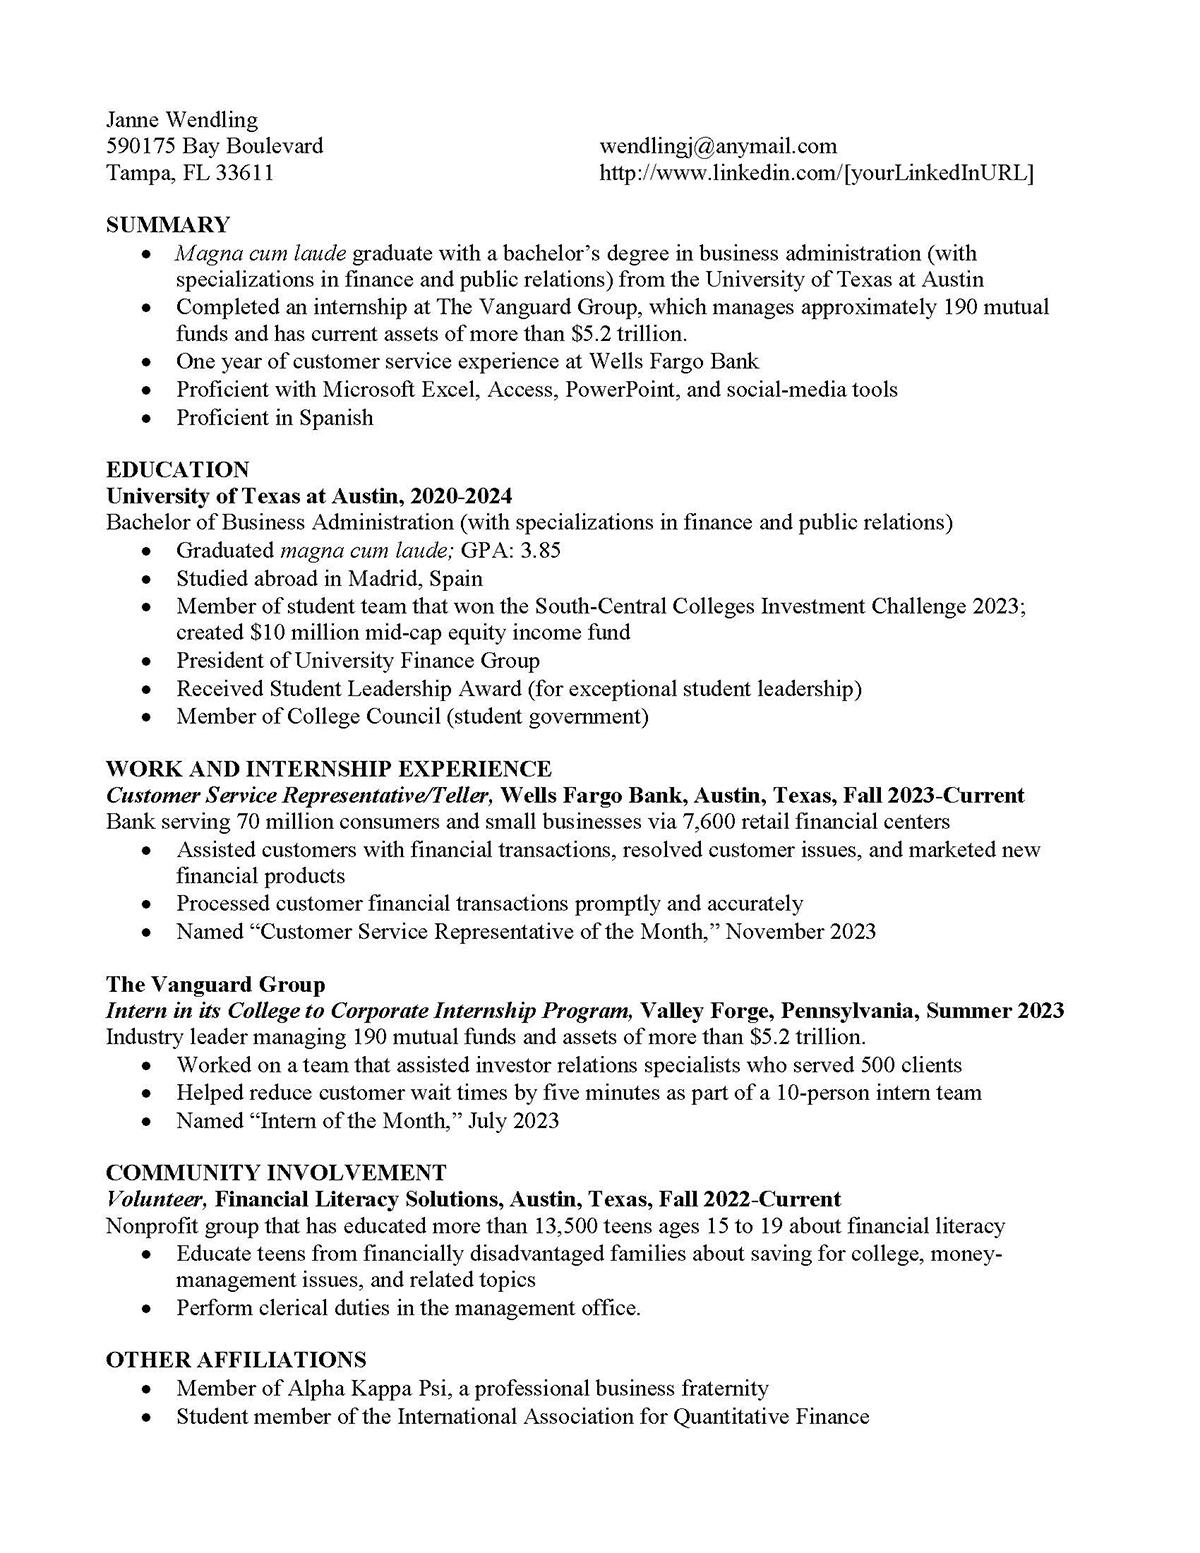 Sample resume: Mutual Funds, Entry Level, Functional